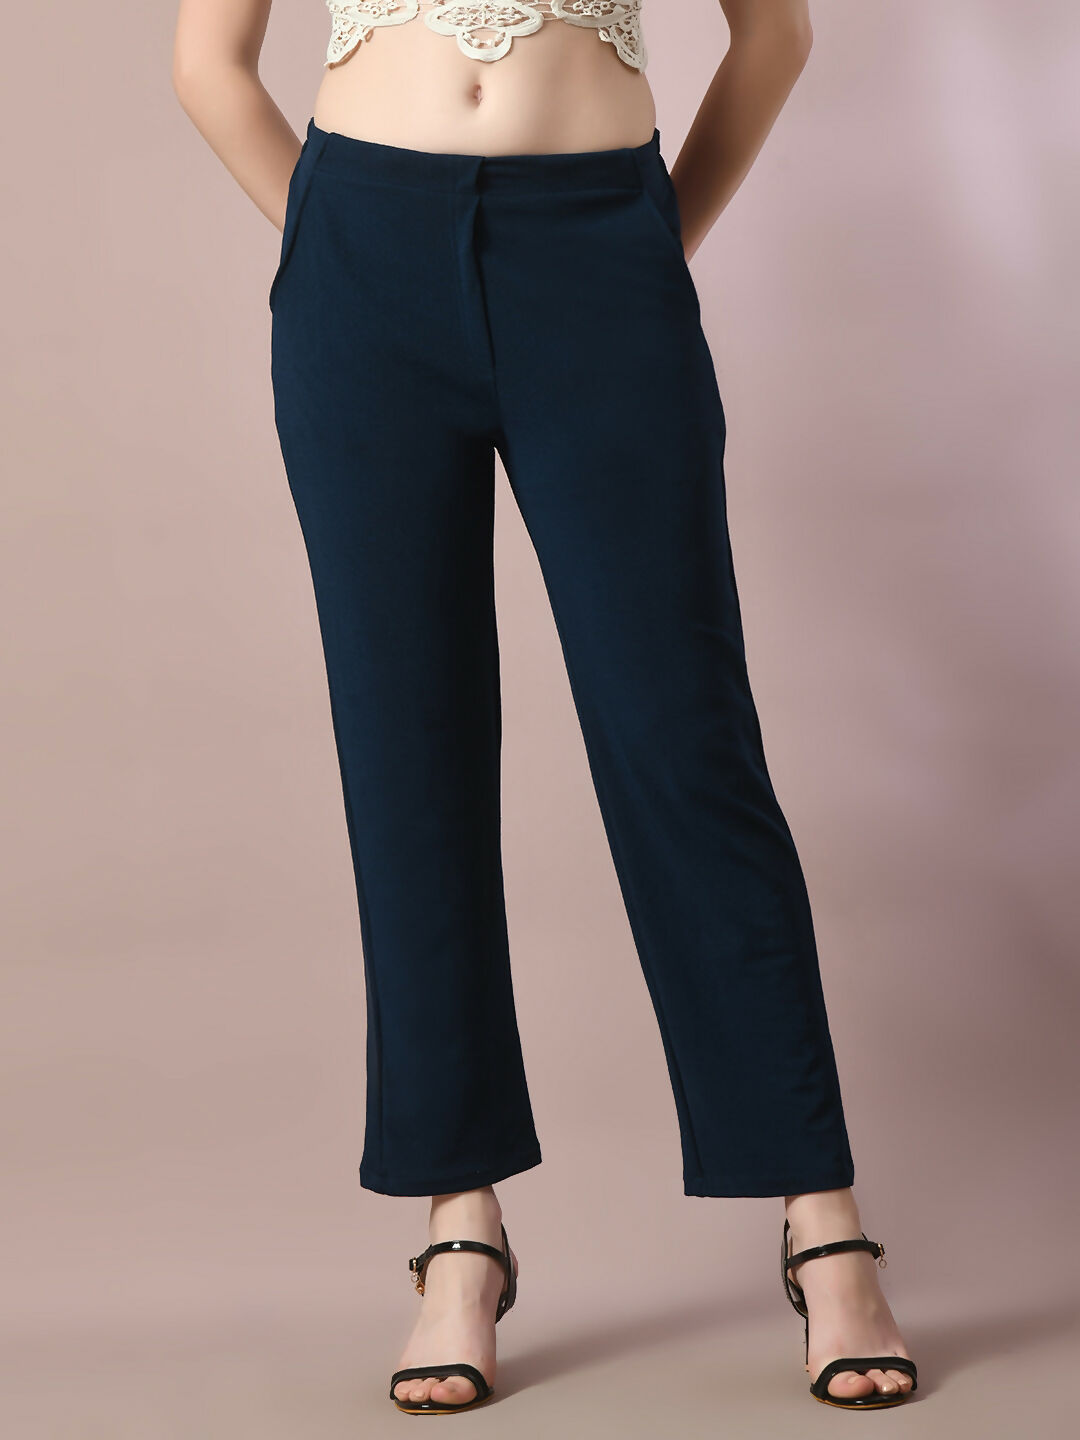 Myshka Women'sNavy Blue Solid Party straight Trousers - Distacart